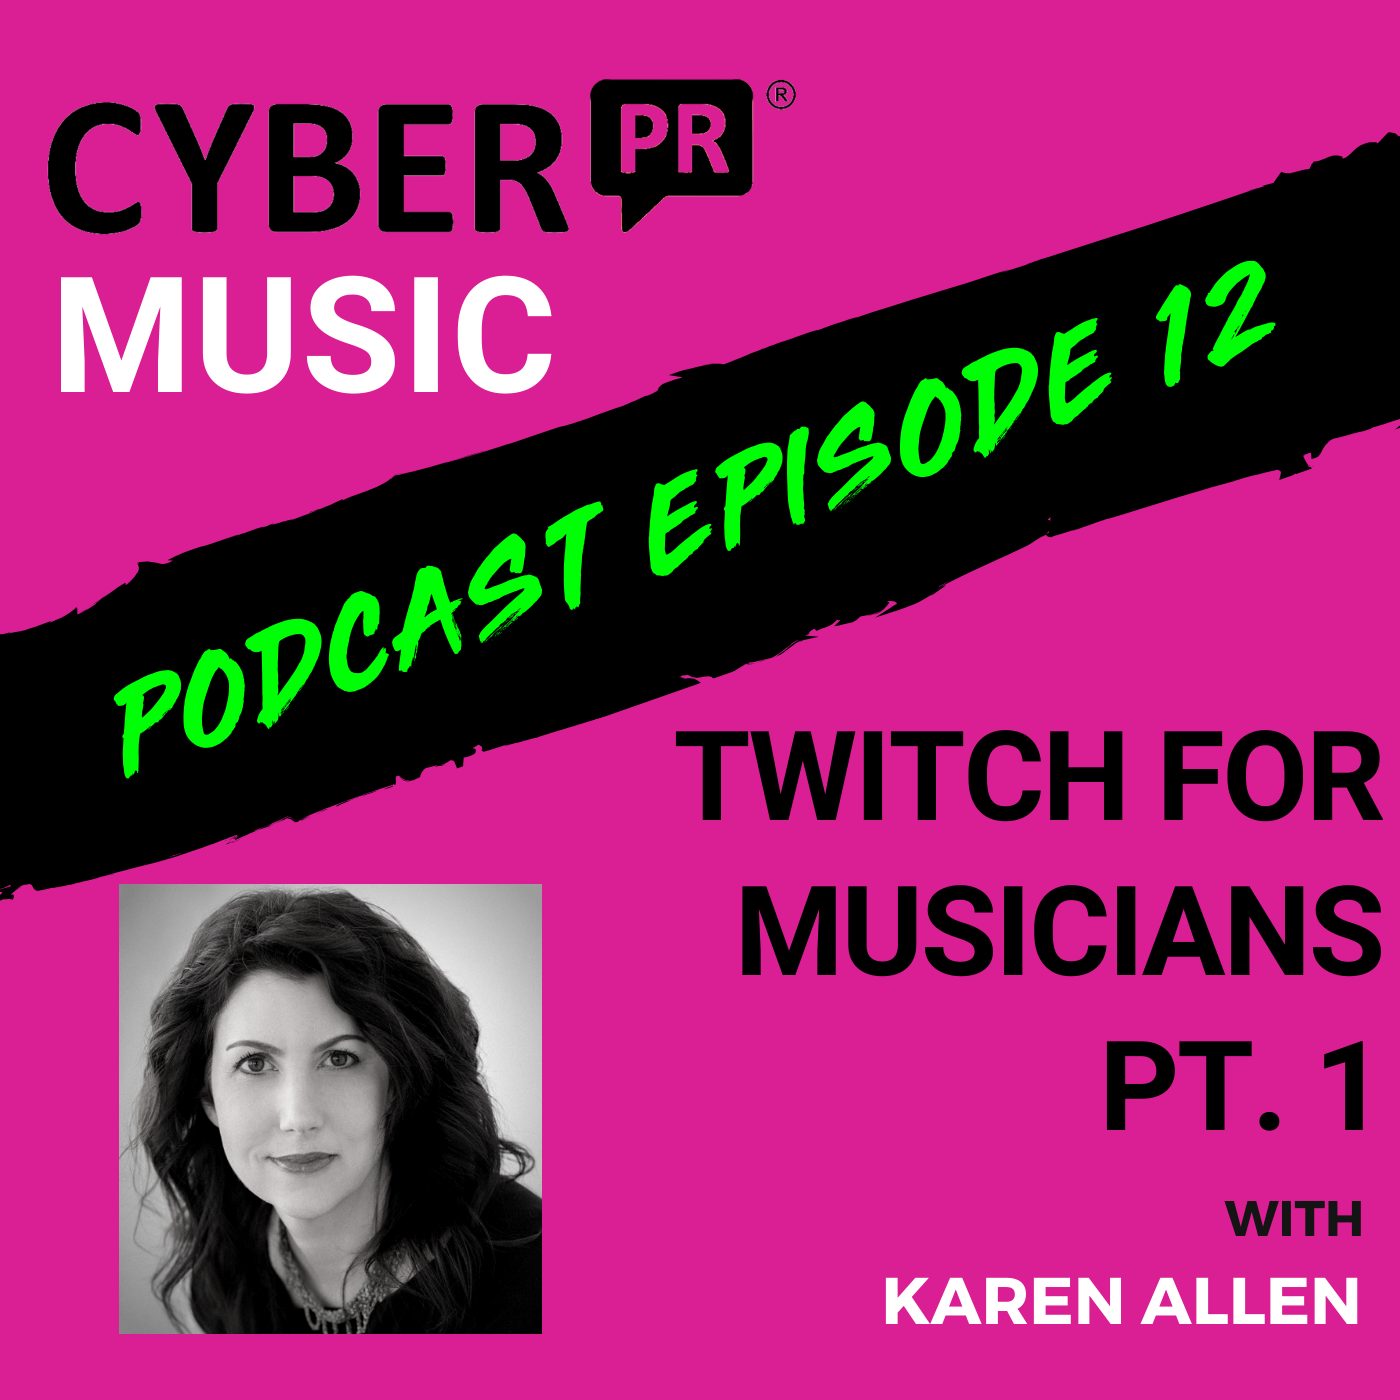 The Cyber PR Music Podcast EP 12: Twitch for Musicians Pt. 1 with Karen Allen